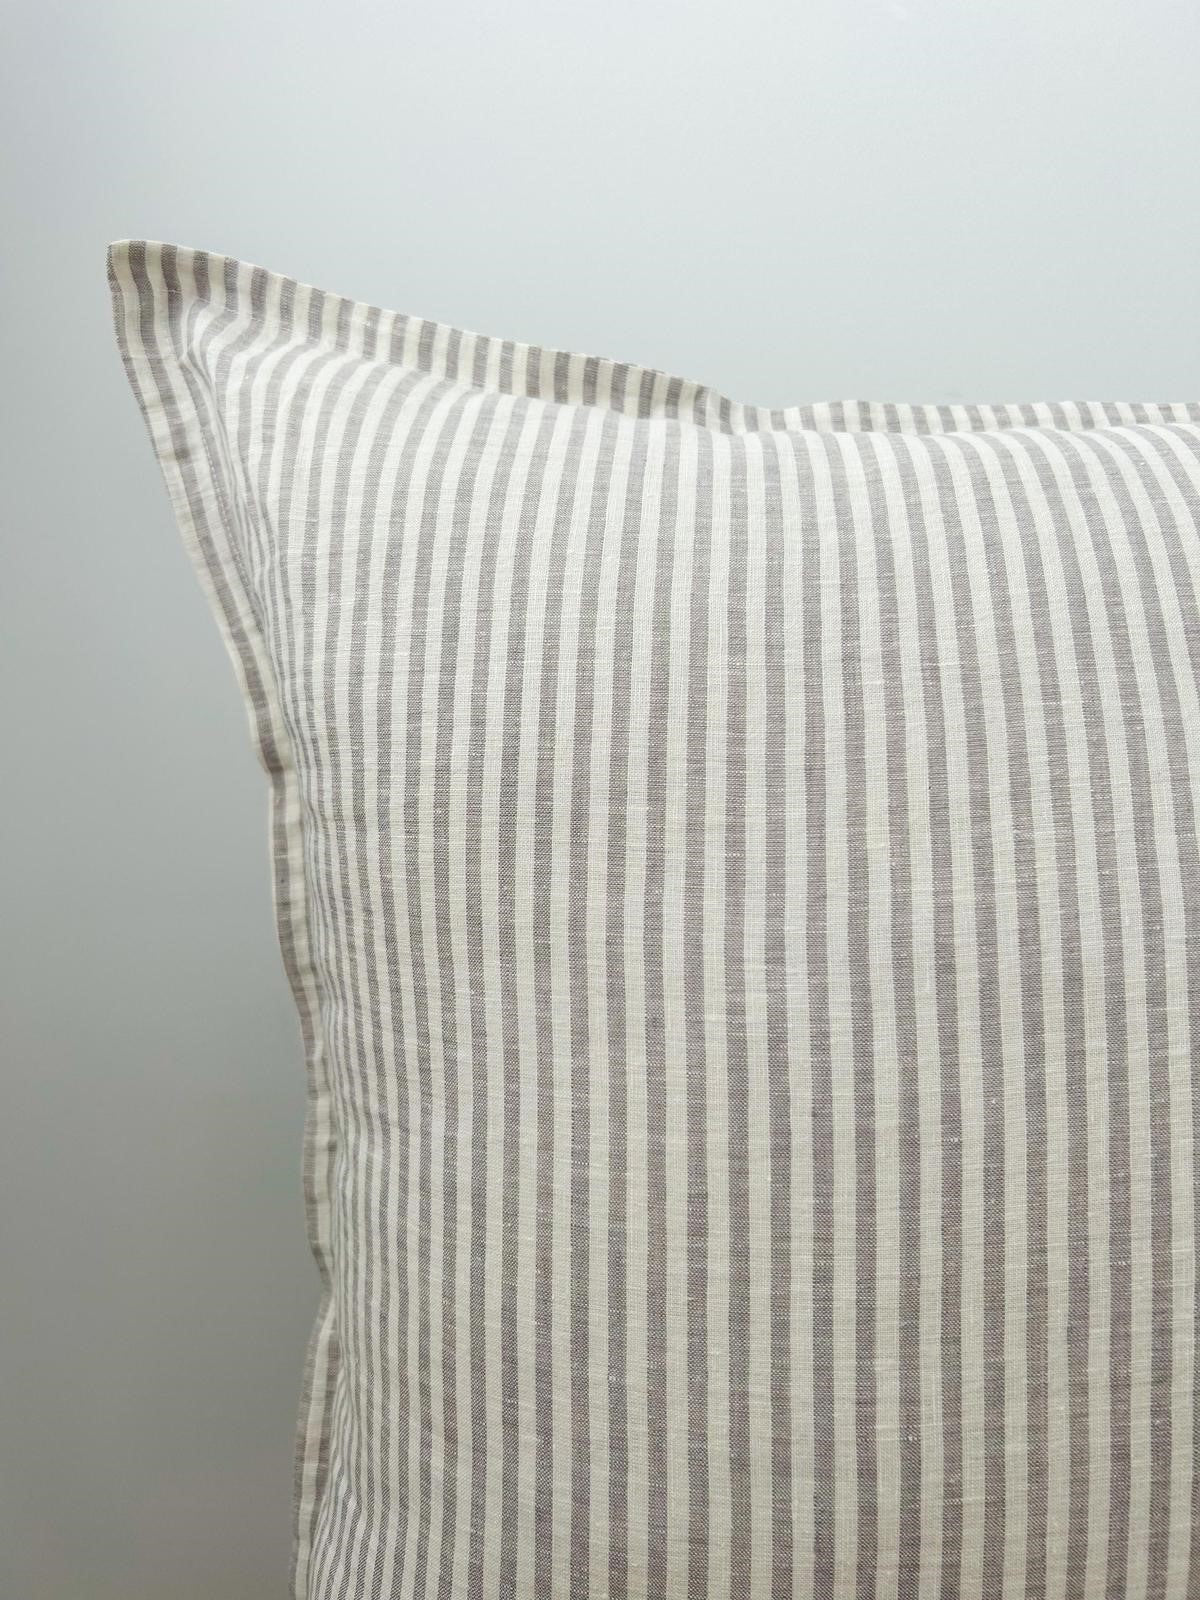 Pure French Linen Euro Cushion - Grey Stripe - 2 for $70